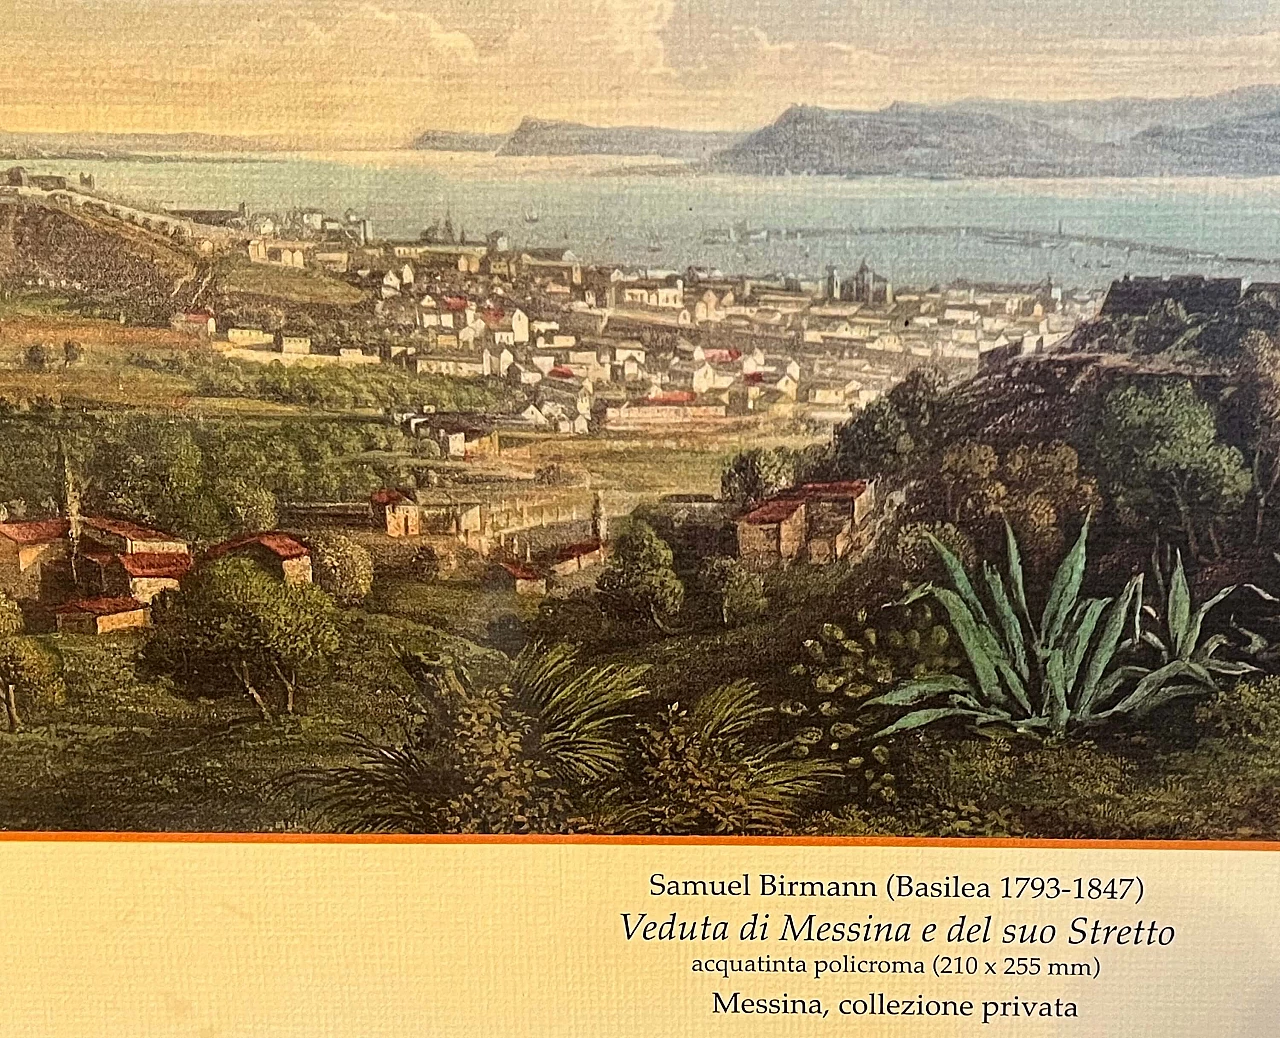 View of Messina, reproduction of Samuel Birmann, color print, 1950s 5